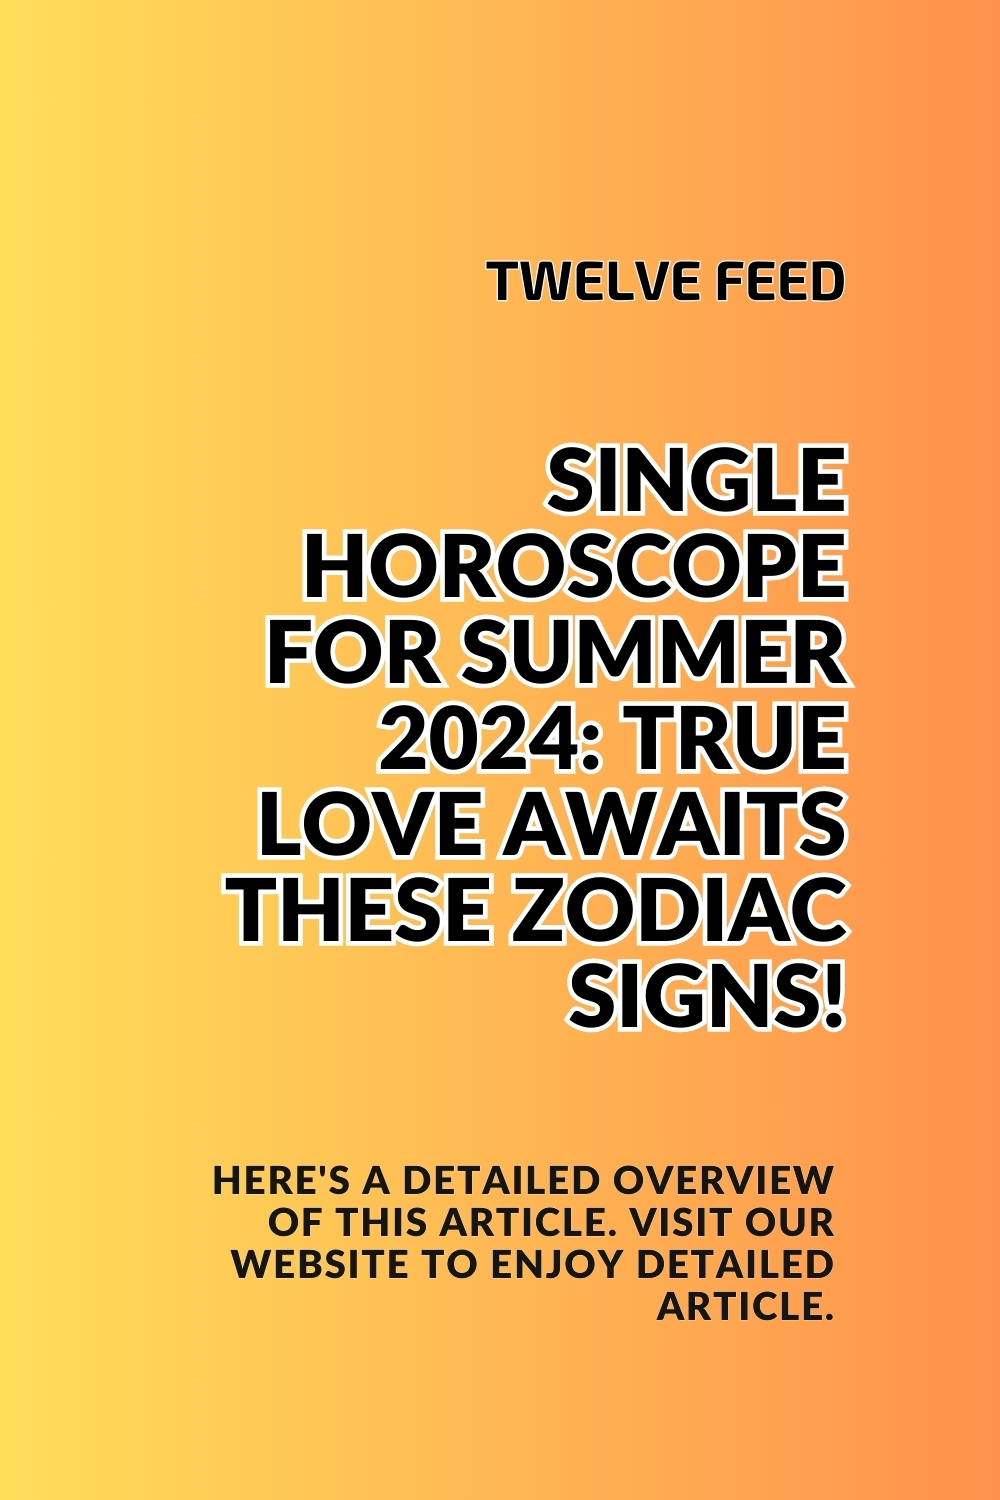 Single Horoscope For Summer 2024: True Love Awaits These Zodiac Signs!